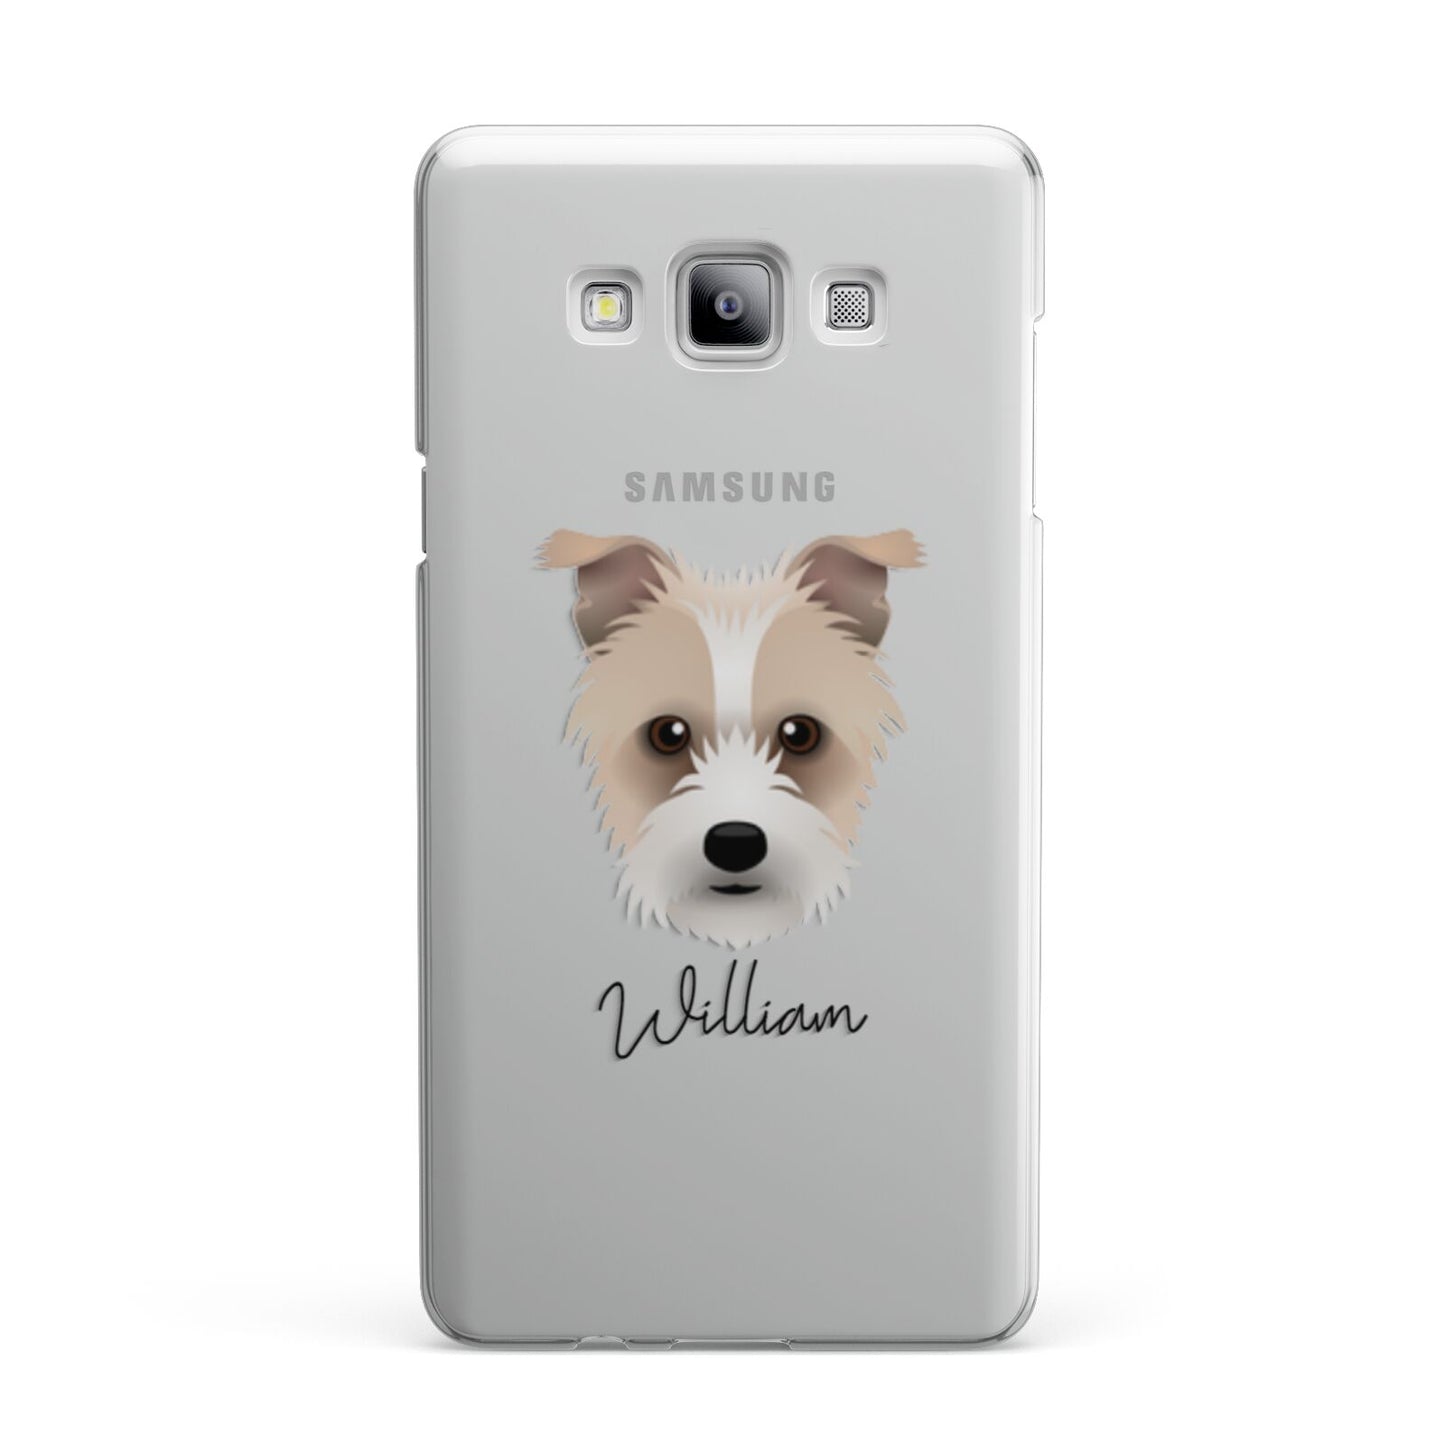 Sporting Lucas Terrier Personalised Samsung Galaxy A7 2015 Case